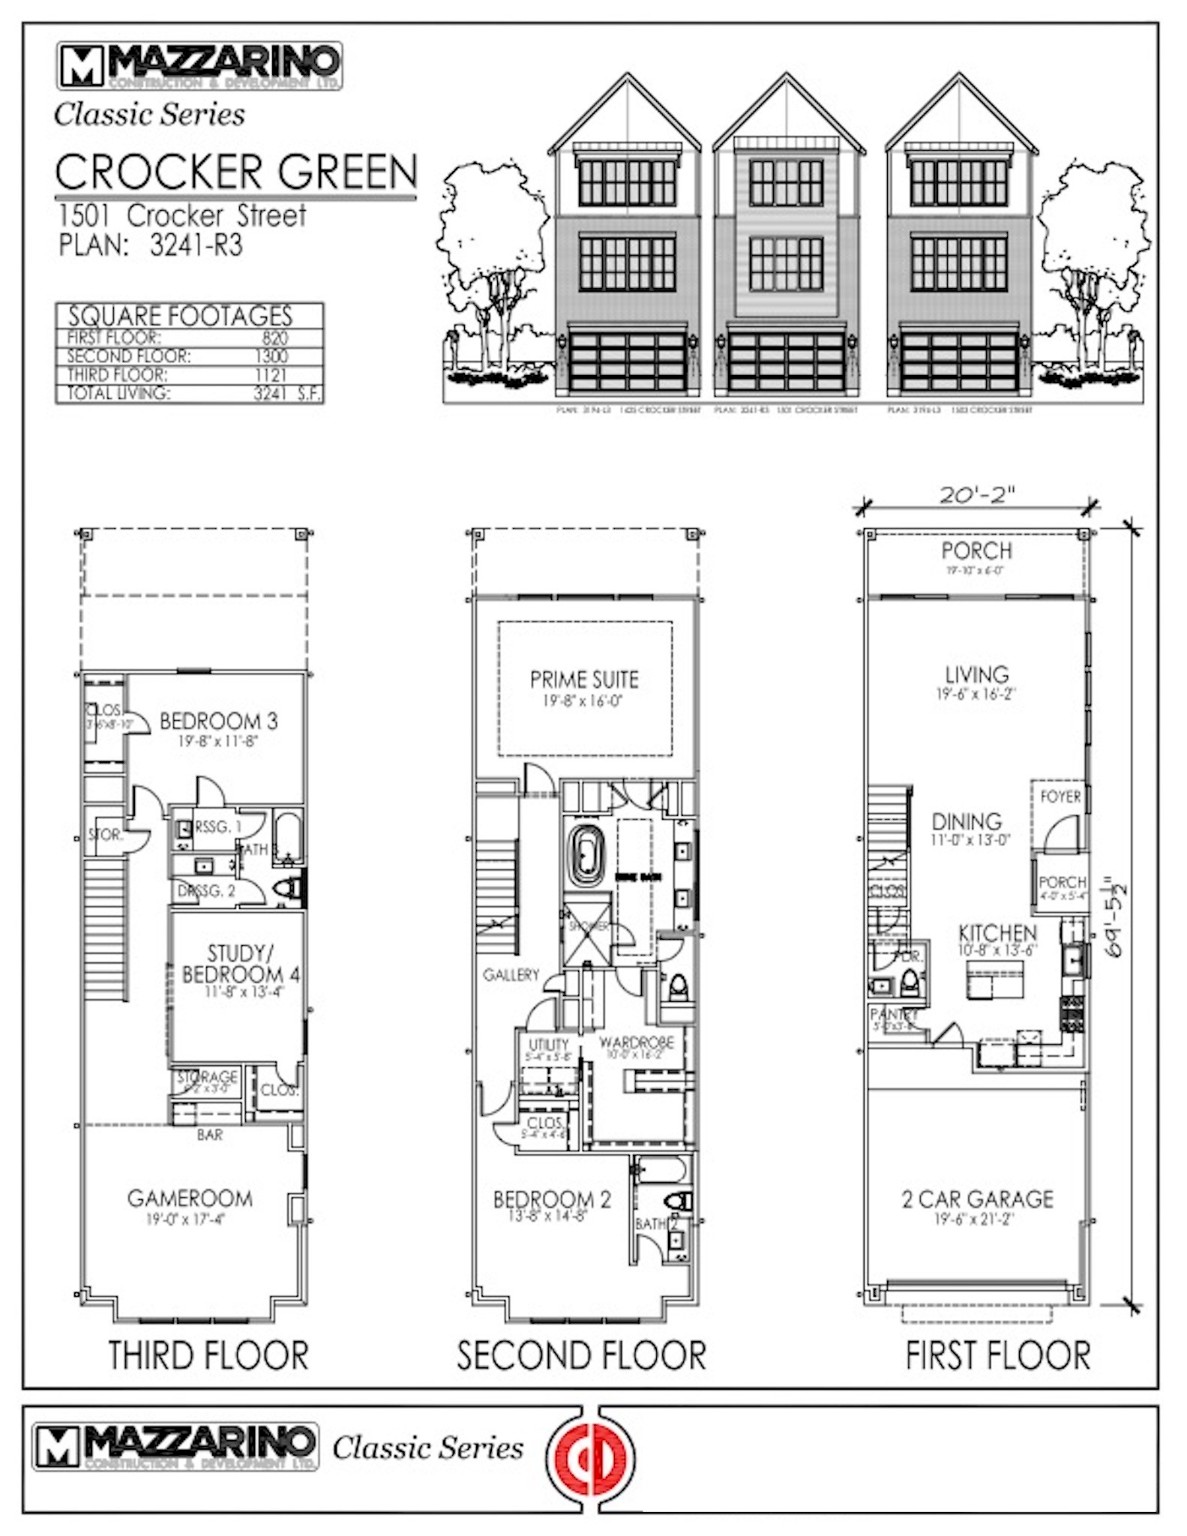 Please be aware that these plans are the property of the architect/builder designer that designed them not DUX Realty, MCD/MAZZTAO Homes or 1501 CROCKER LLC and are protected from reproduction and sharing under copyright law. These drawing are for general information only. Measurements, square footages and features are for illustrative marketing purposes. All information drawing are for general information only.